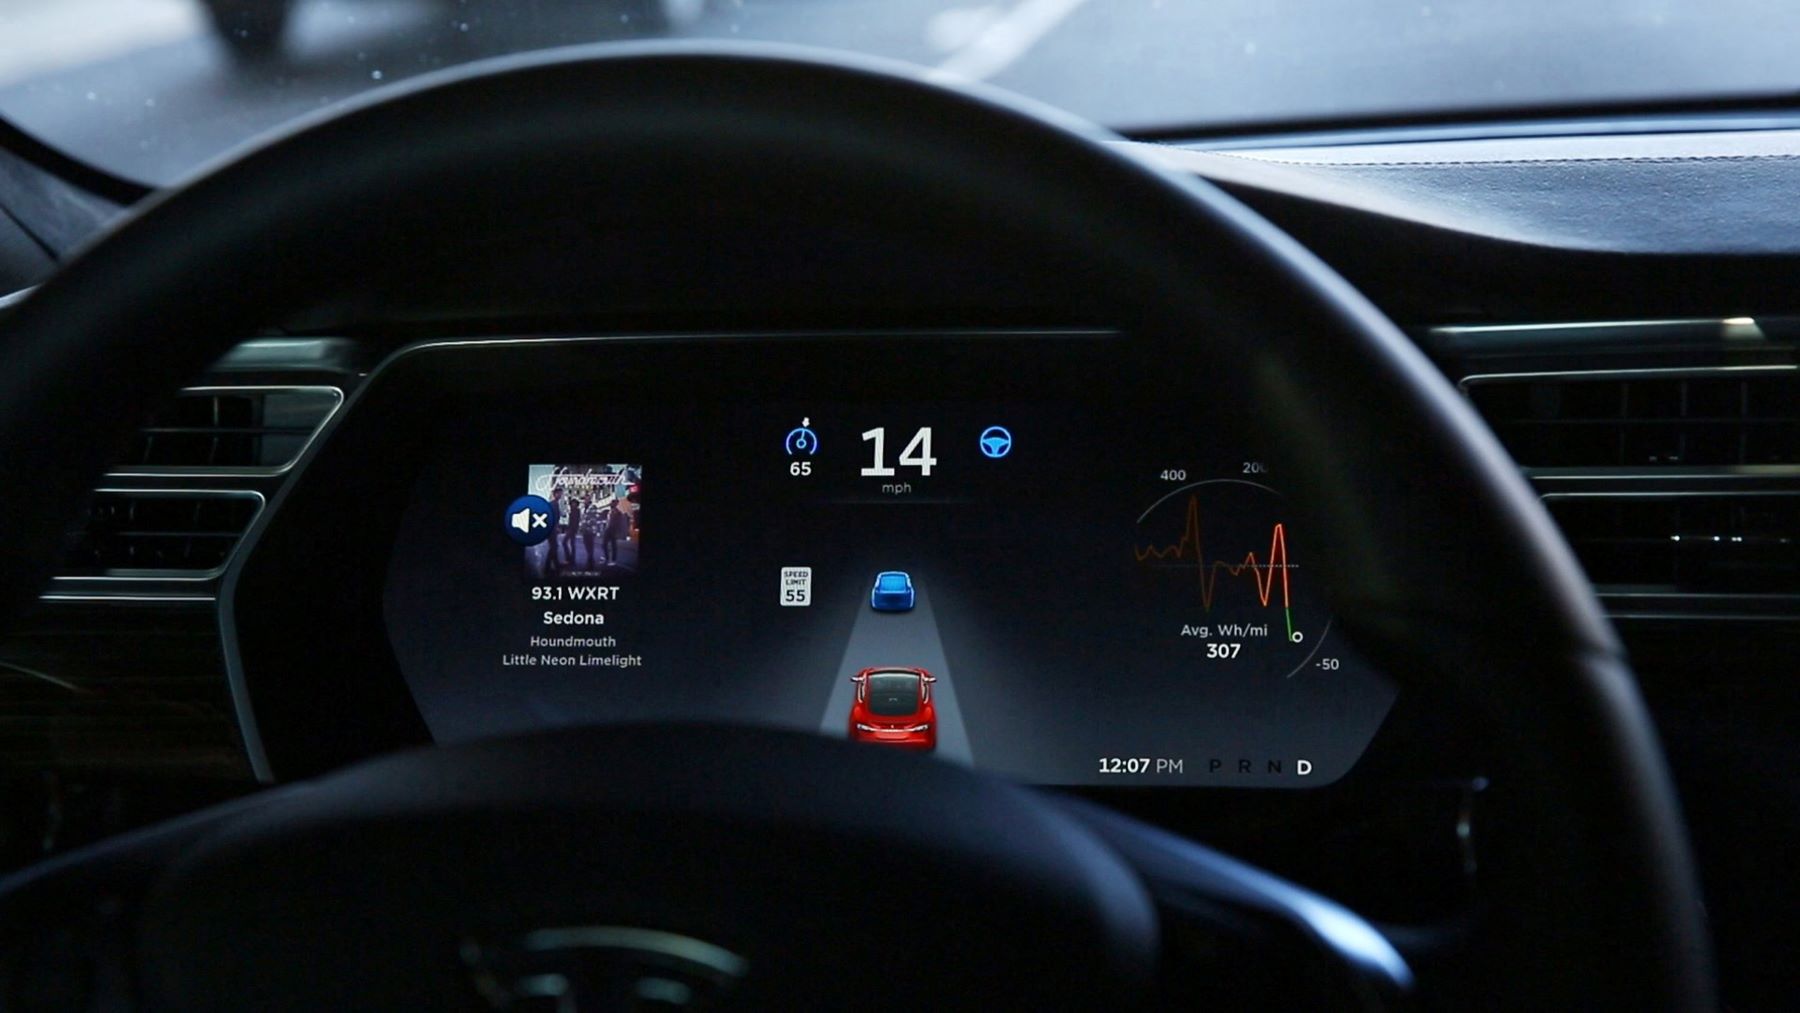 The driver's display of a Tesla Model S showing self-driving autonomous vehicle technology